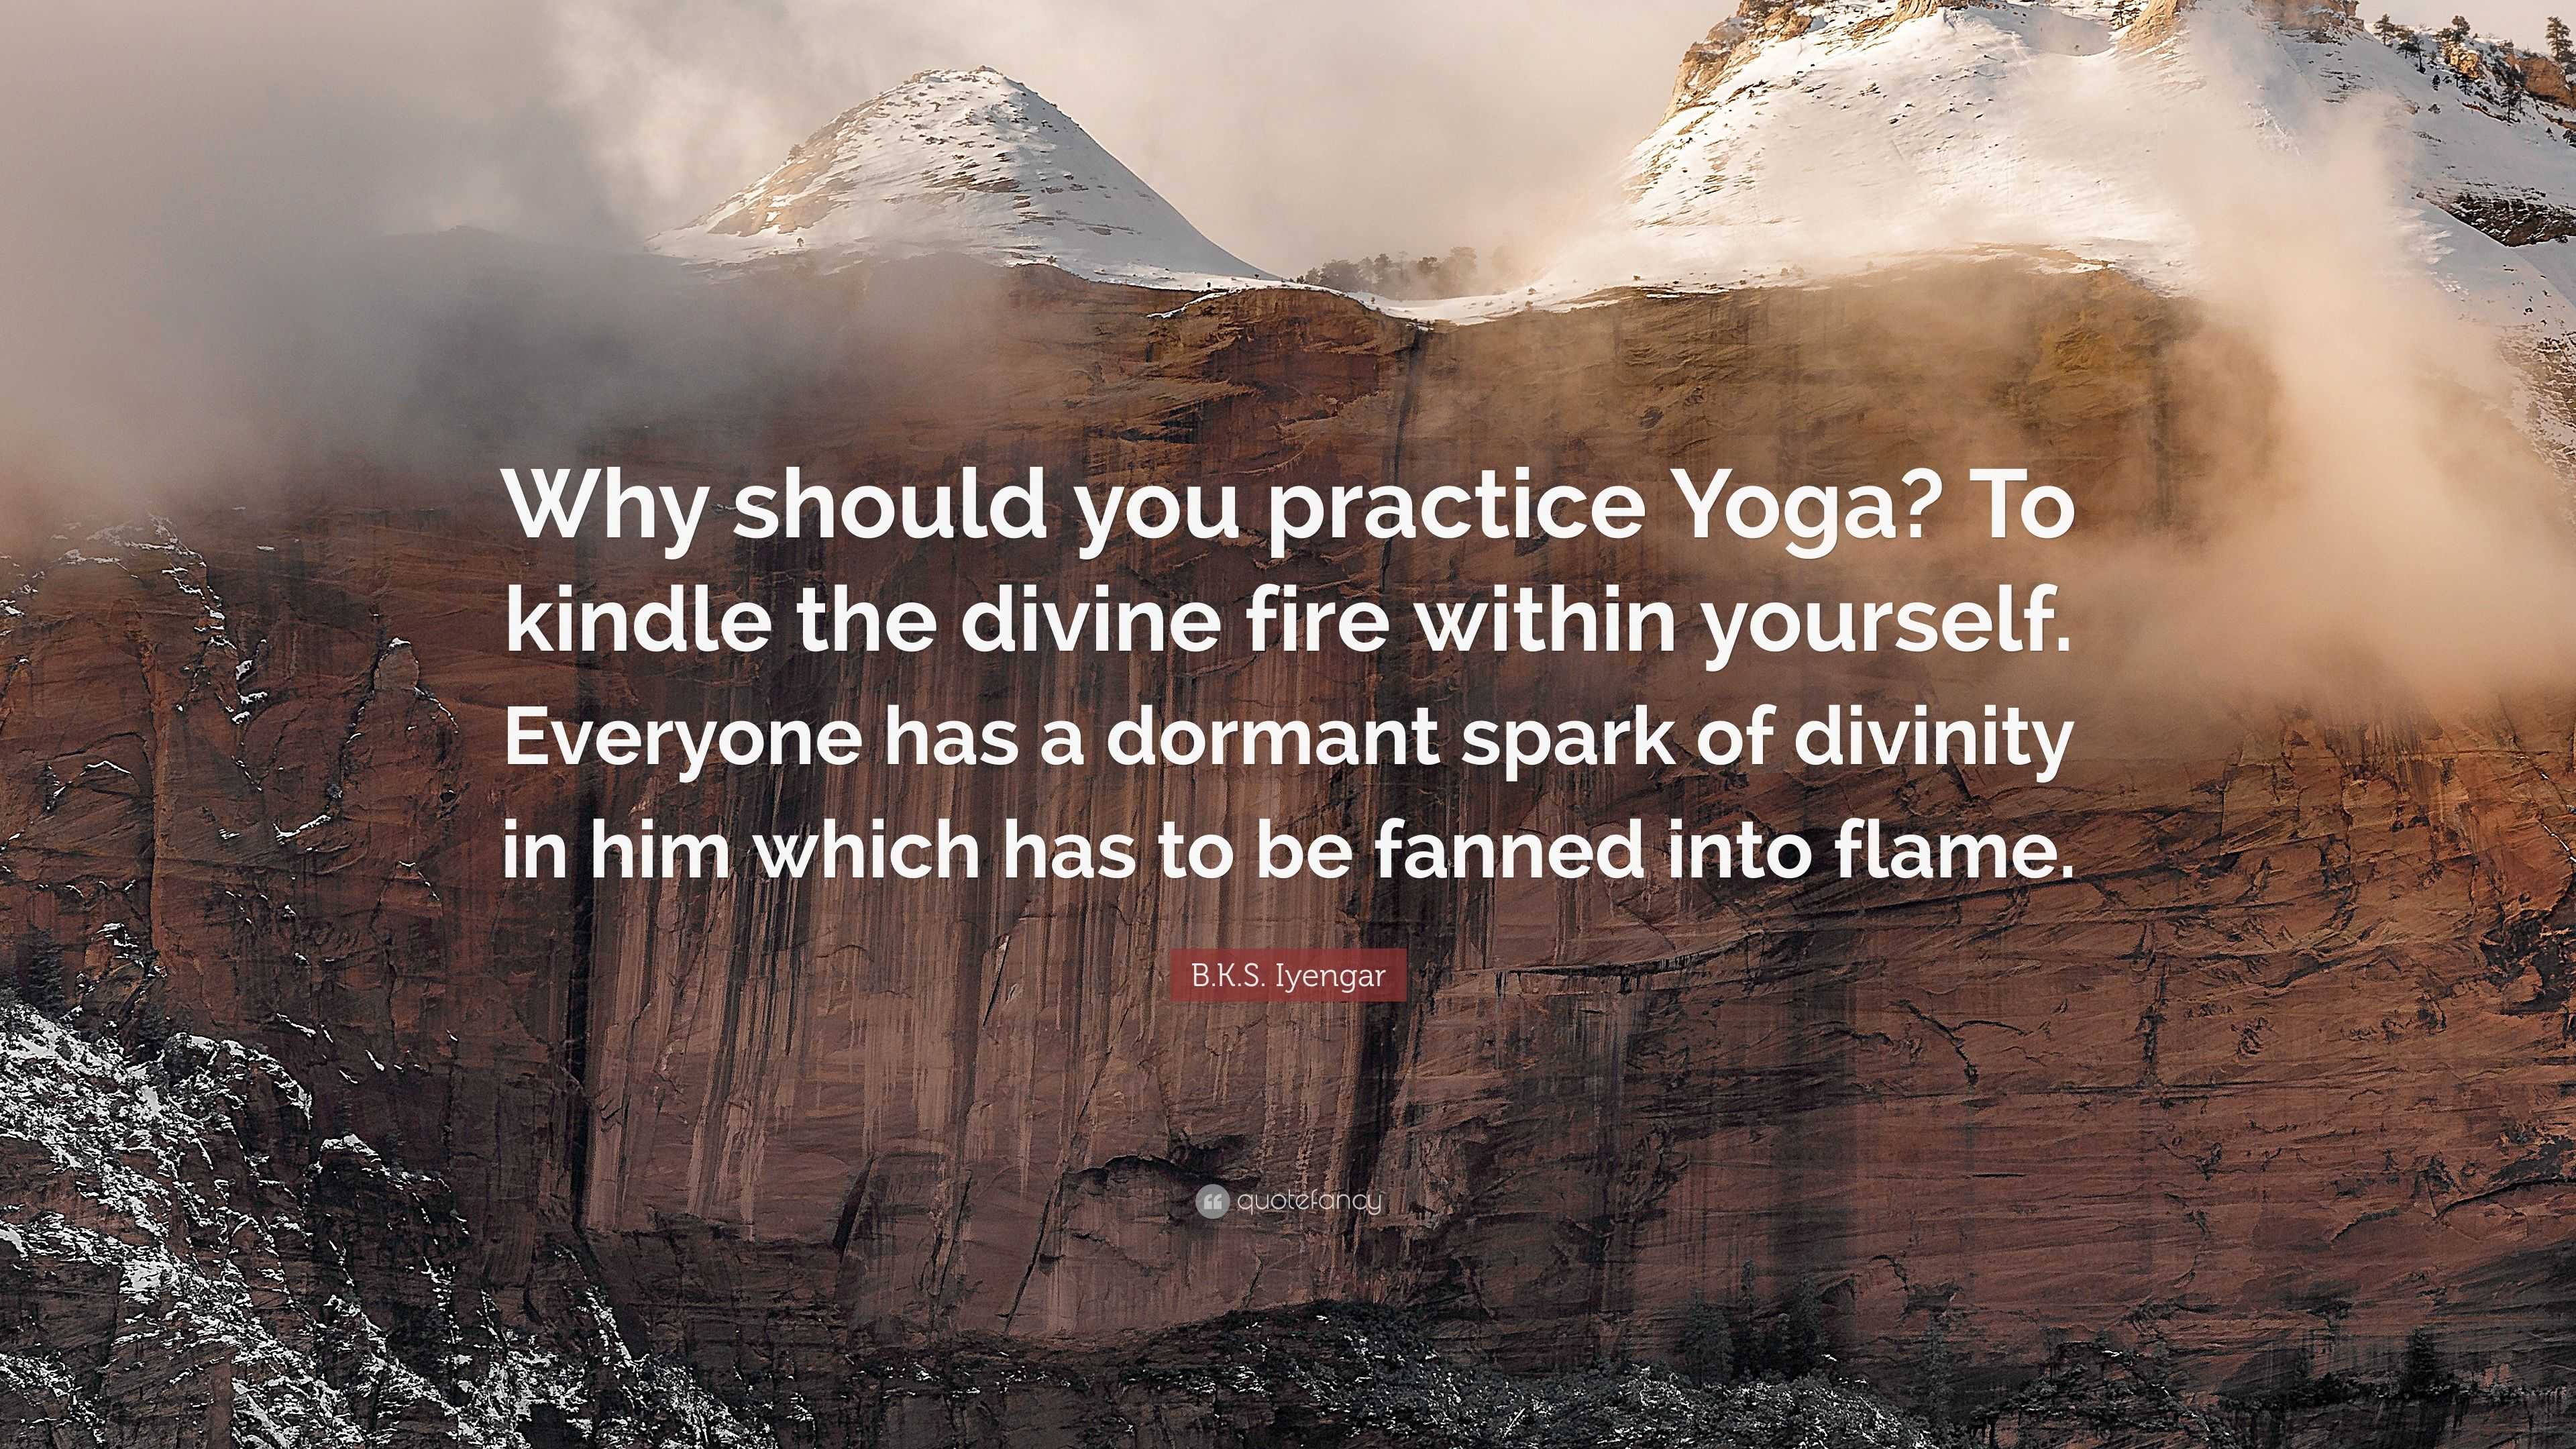 B.K.S. Iyengar Quote: “Why should you practice Yoga? To kindle the divine  fire within yourself. Everyone has a dormant spark of divinity in him”